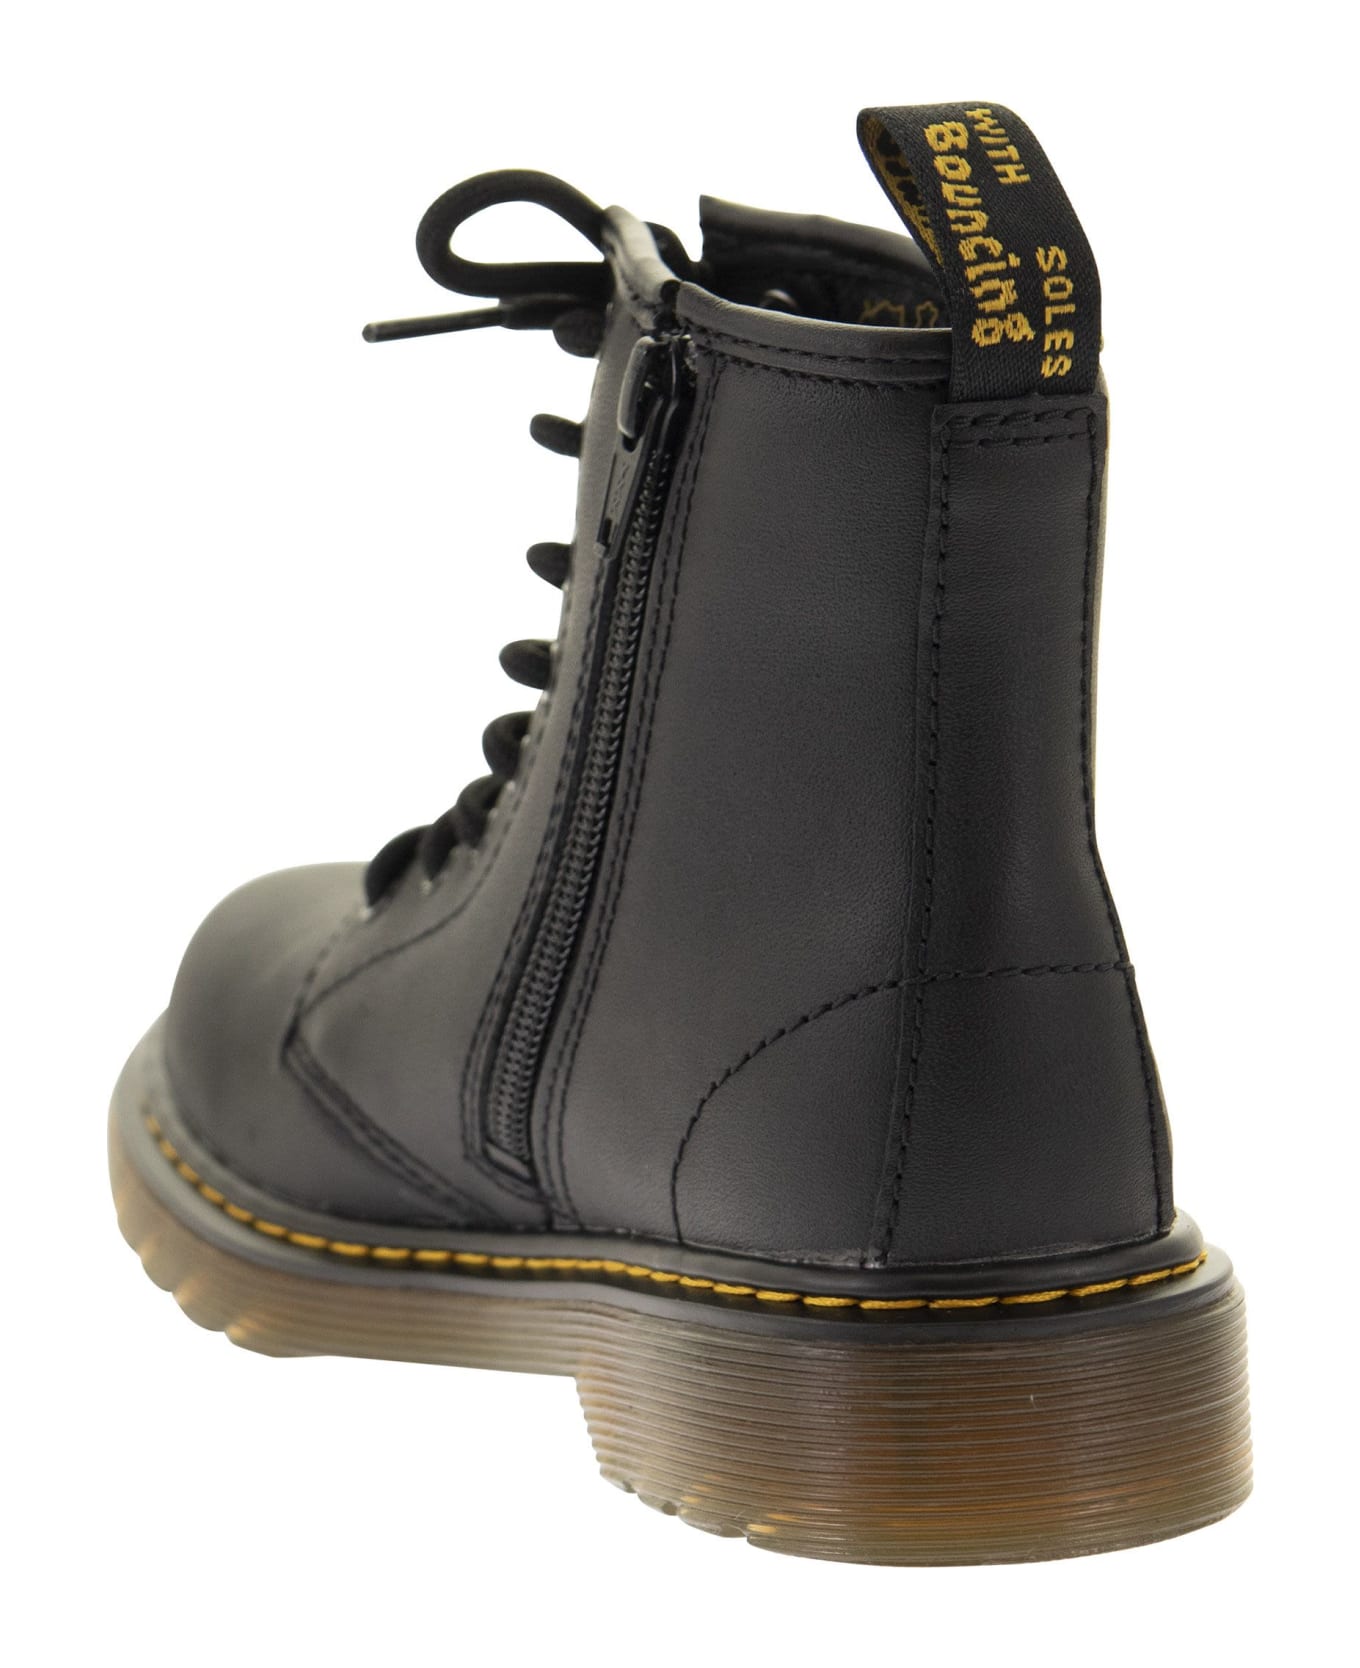 Dr. Martens 8-eye Leather Ankle Boot 1460 - Black